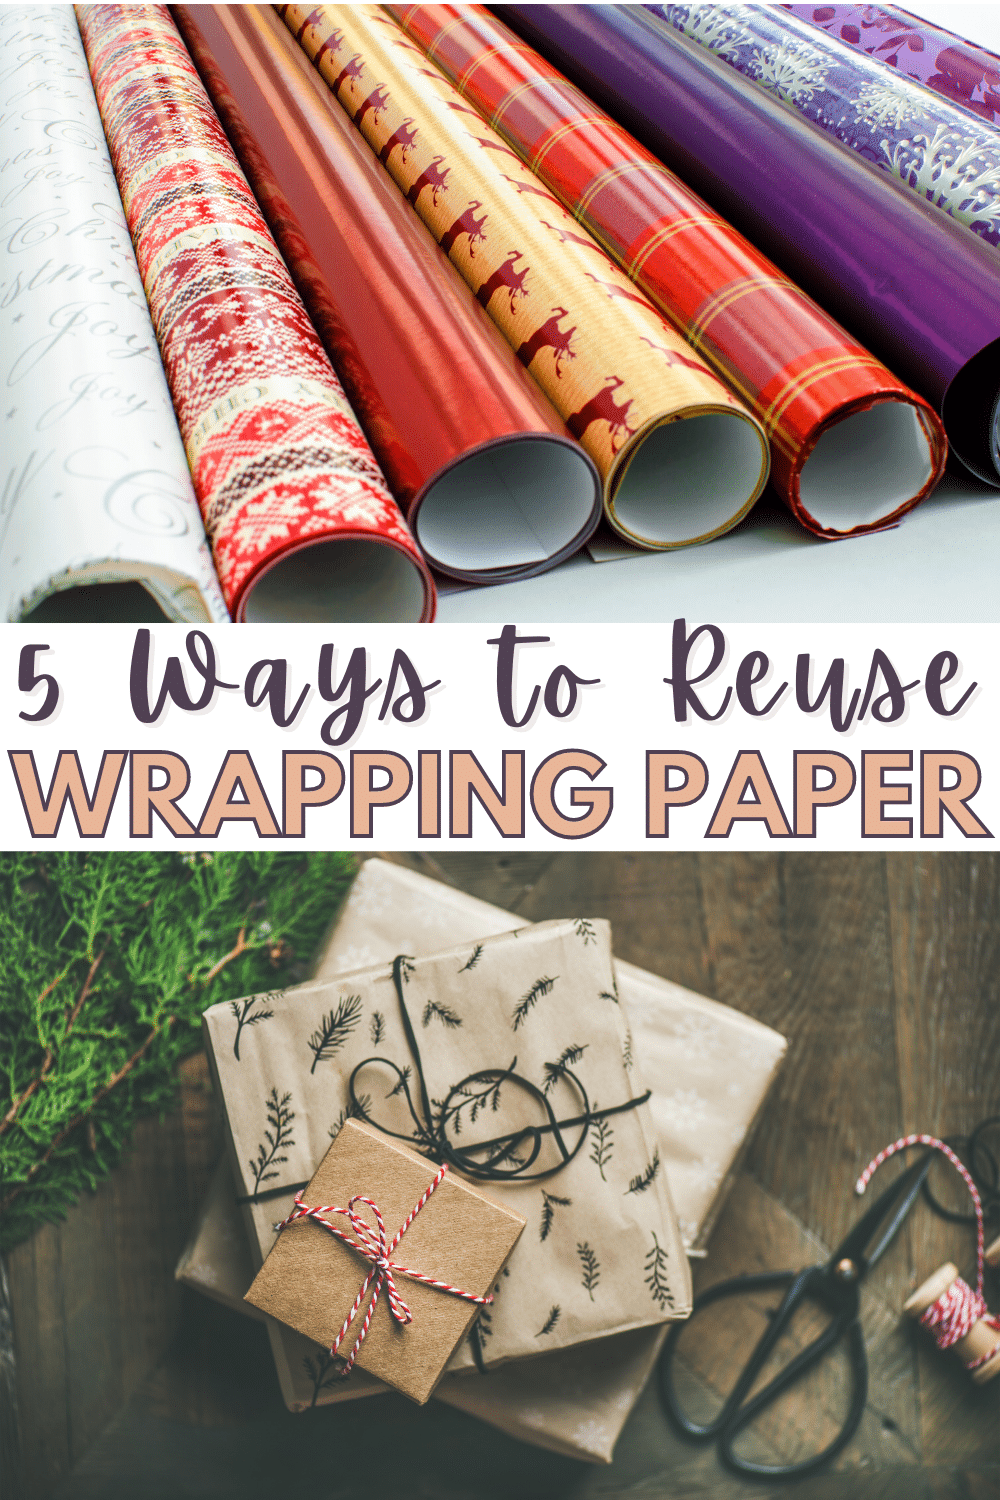 Don't throw that leftover wrapping paper away! Before you toss it in the recycling bin, try one of these clever uses for wrapping paper. #repurpose #upcycle #newusesoldthings via @wondermomwannab